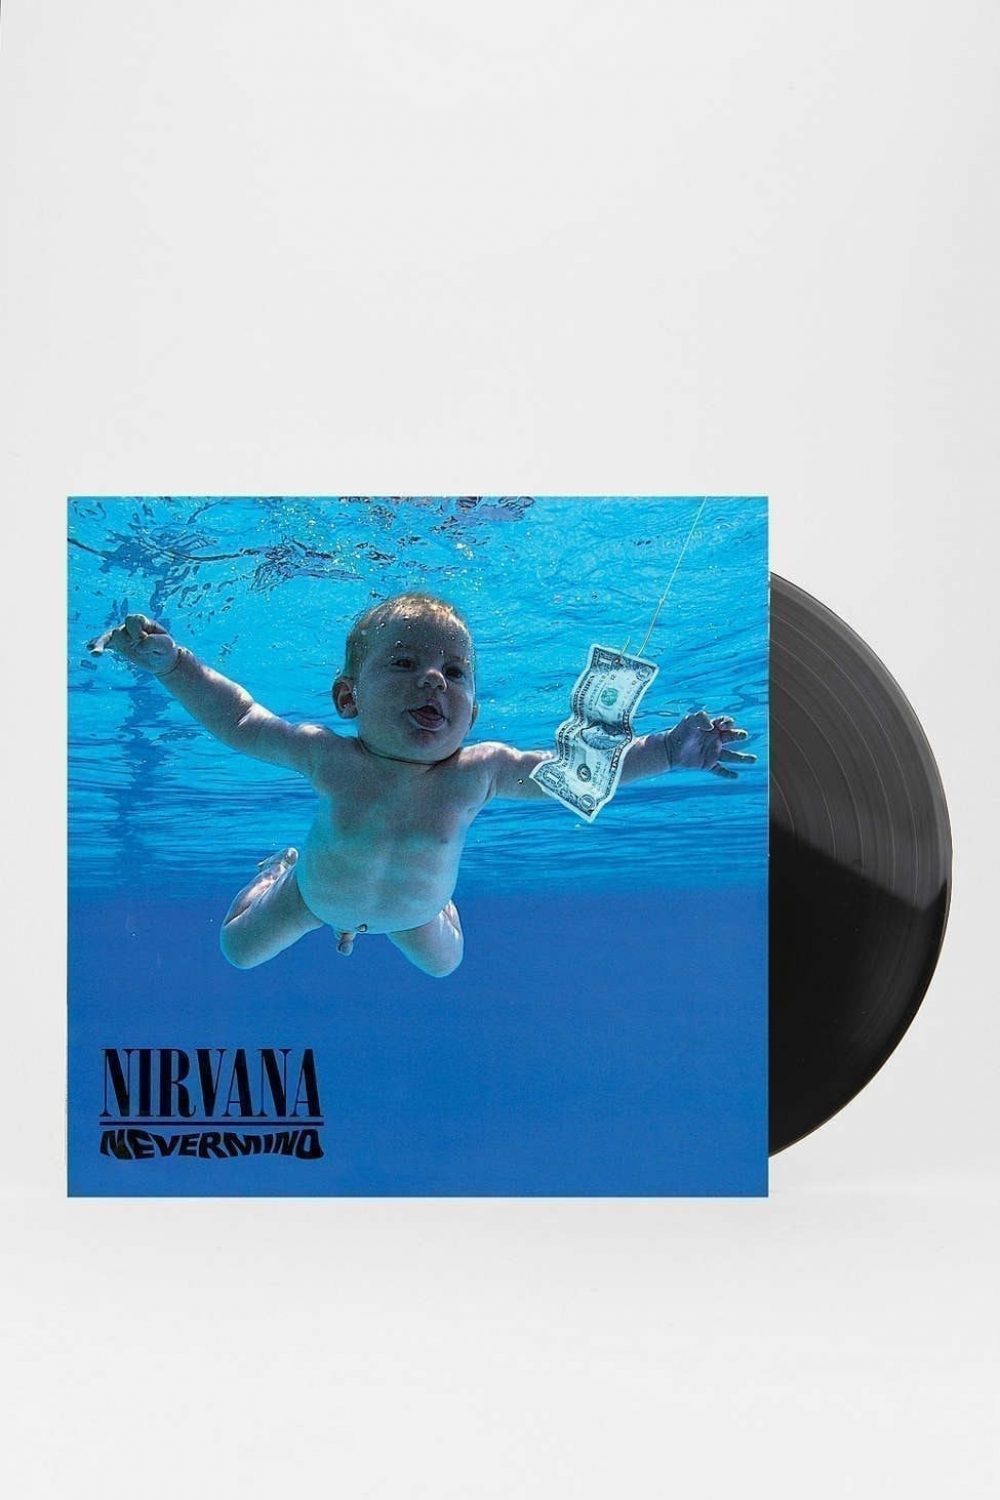 Nirvana's Nevermind is available to purchase online on vinyl